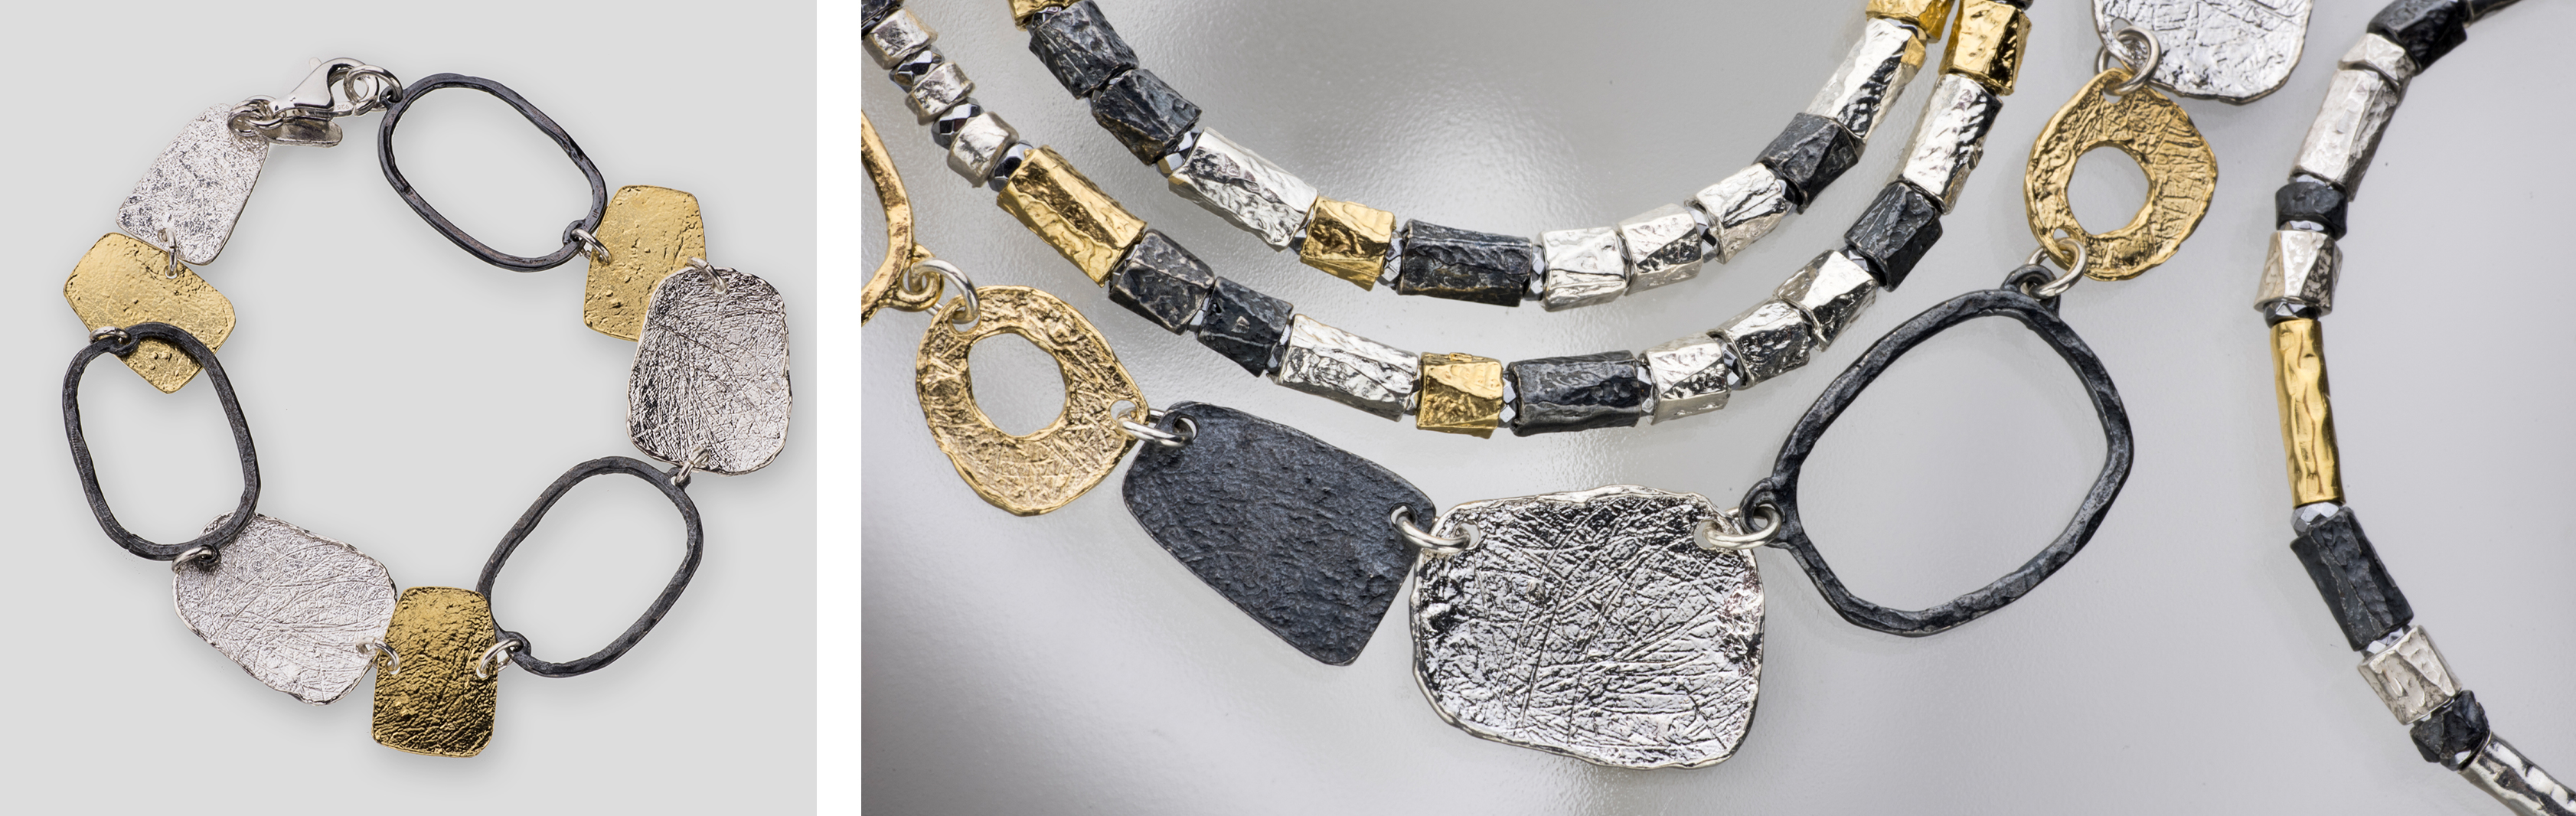 Depths of the Earth Collection | White, Oxidized & Gilded Silver Jewelry